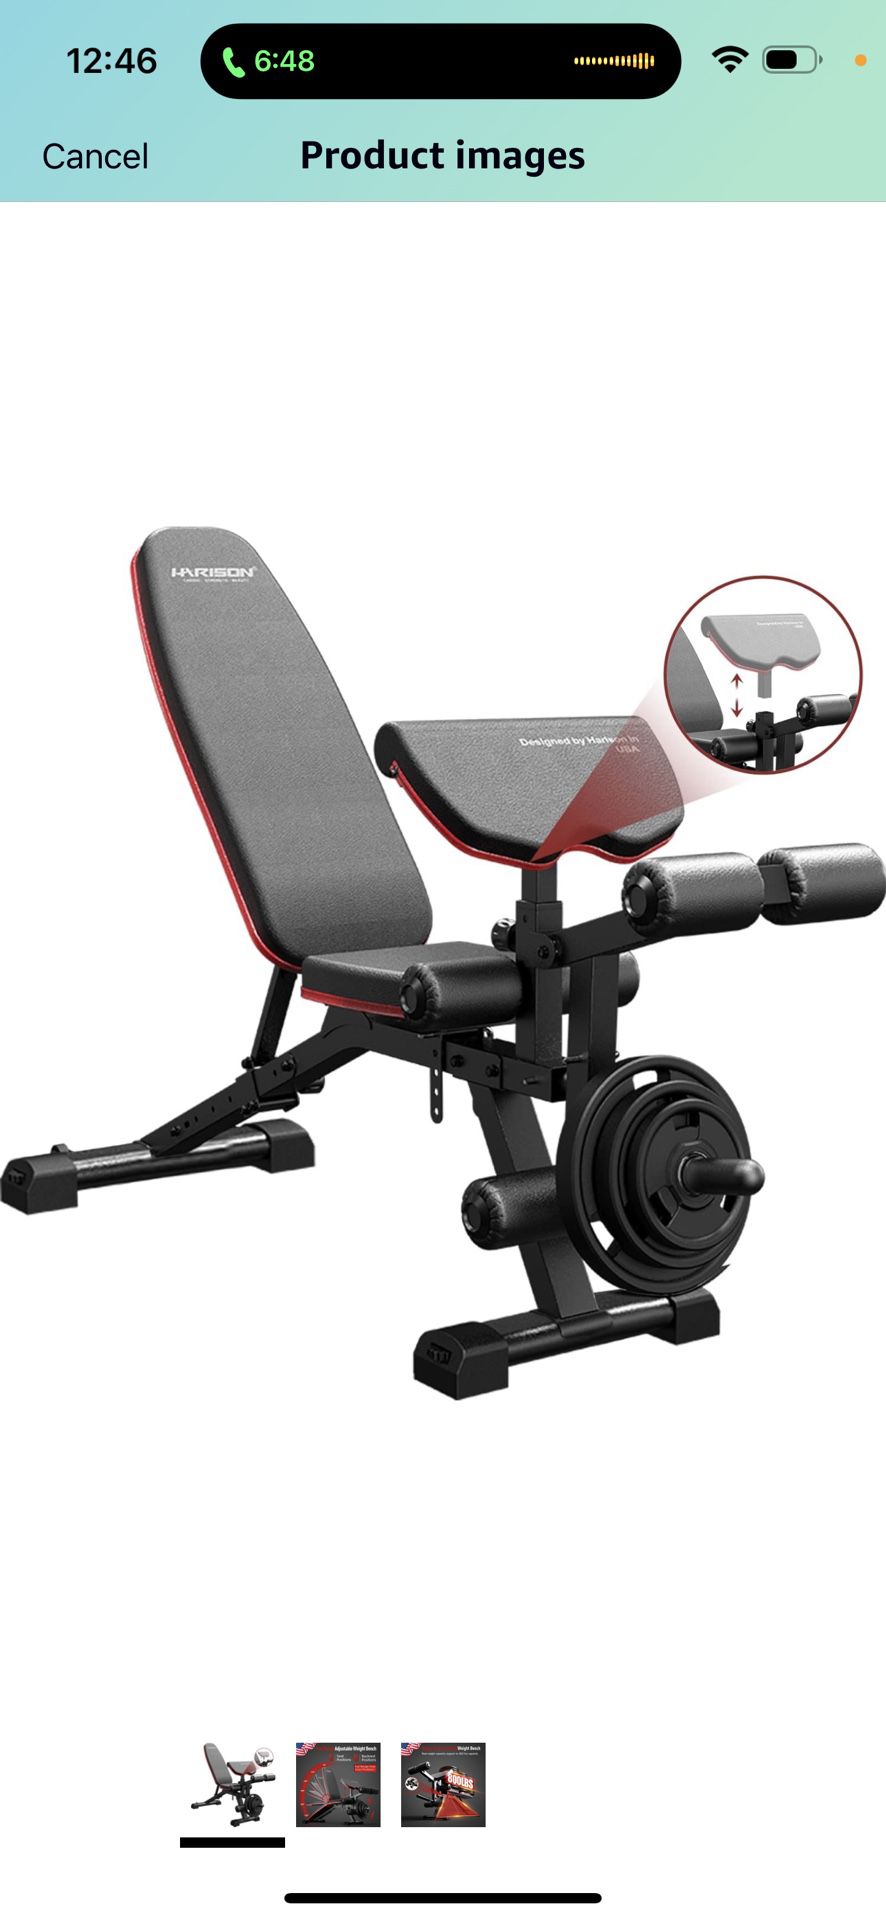 HARISON Adjustable Weight Bench with Leg Extension and Preacher Pad, Flat Incline Decline Exercise Bench for Home Workout Weight Training